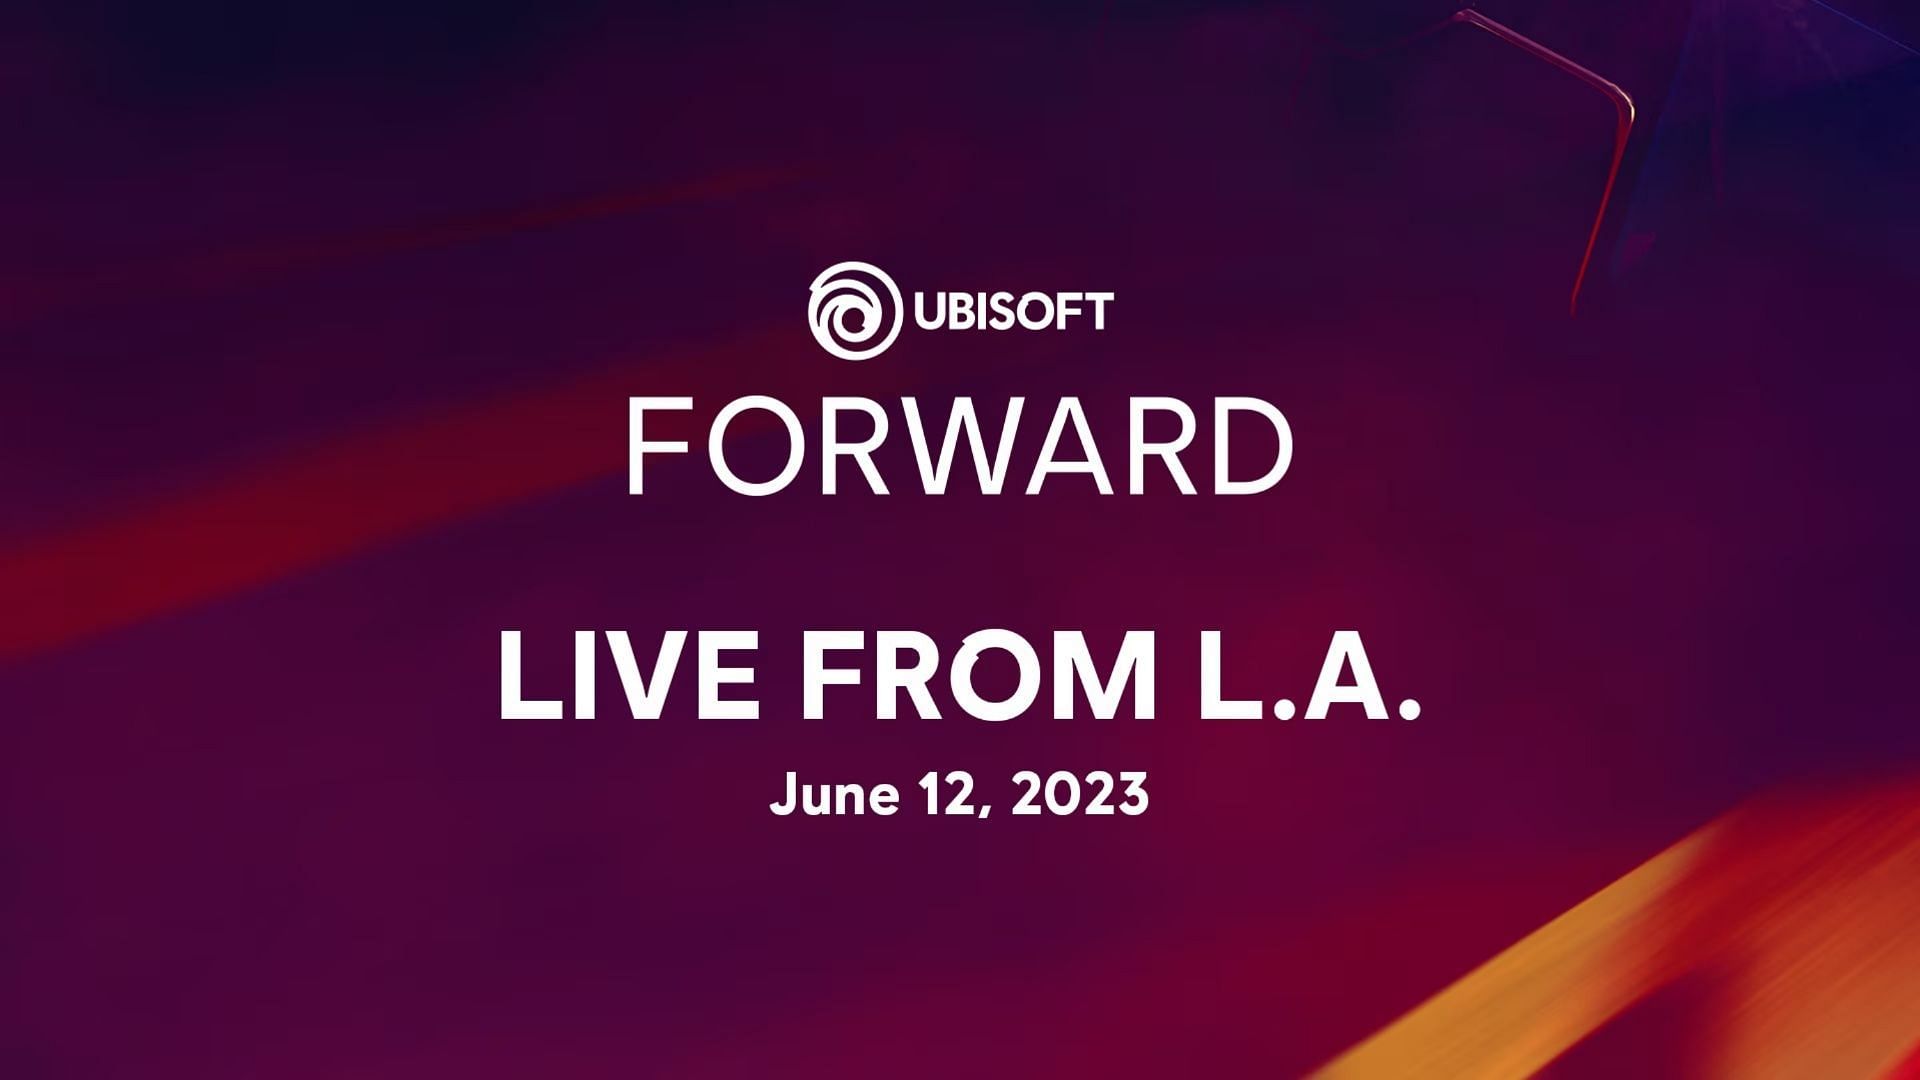 Ubisoft Forward showcase announced for June, will feature new gameplay for Assassin